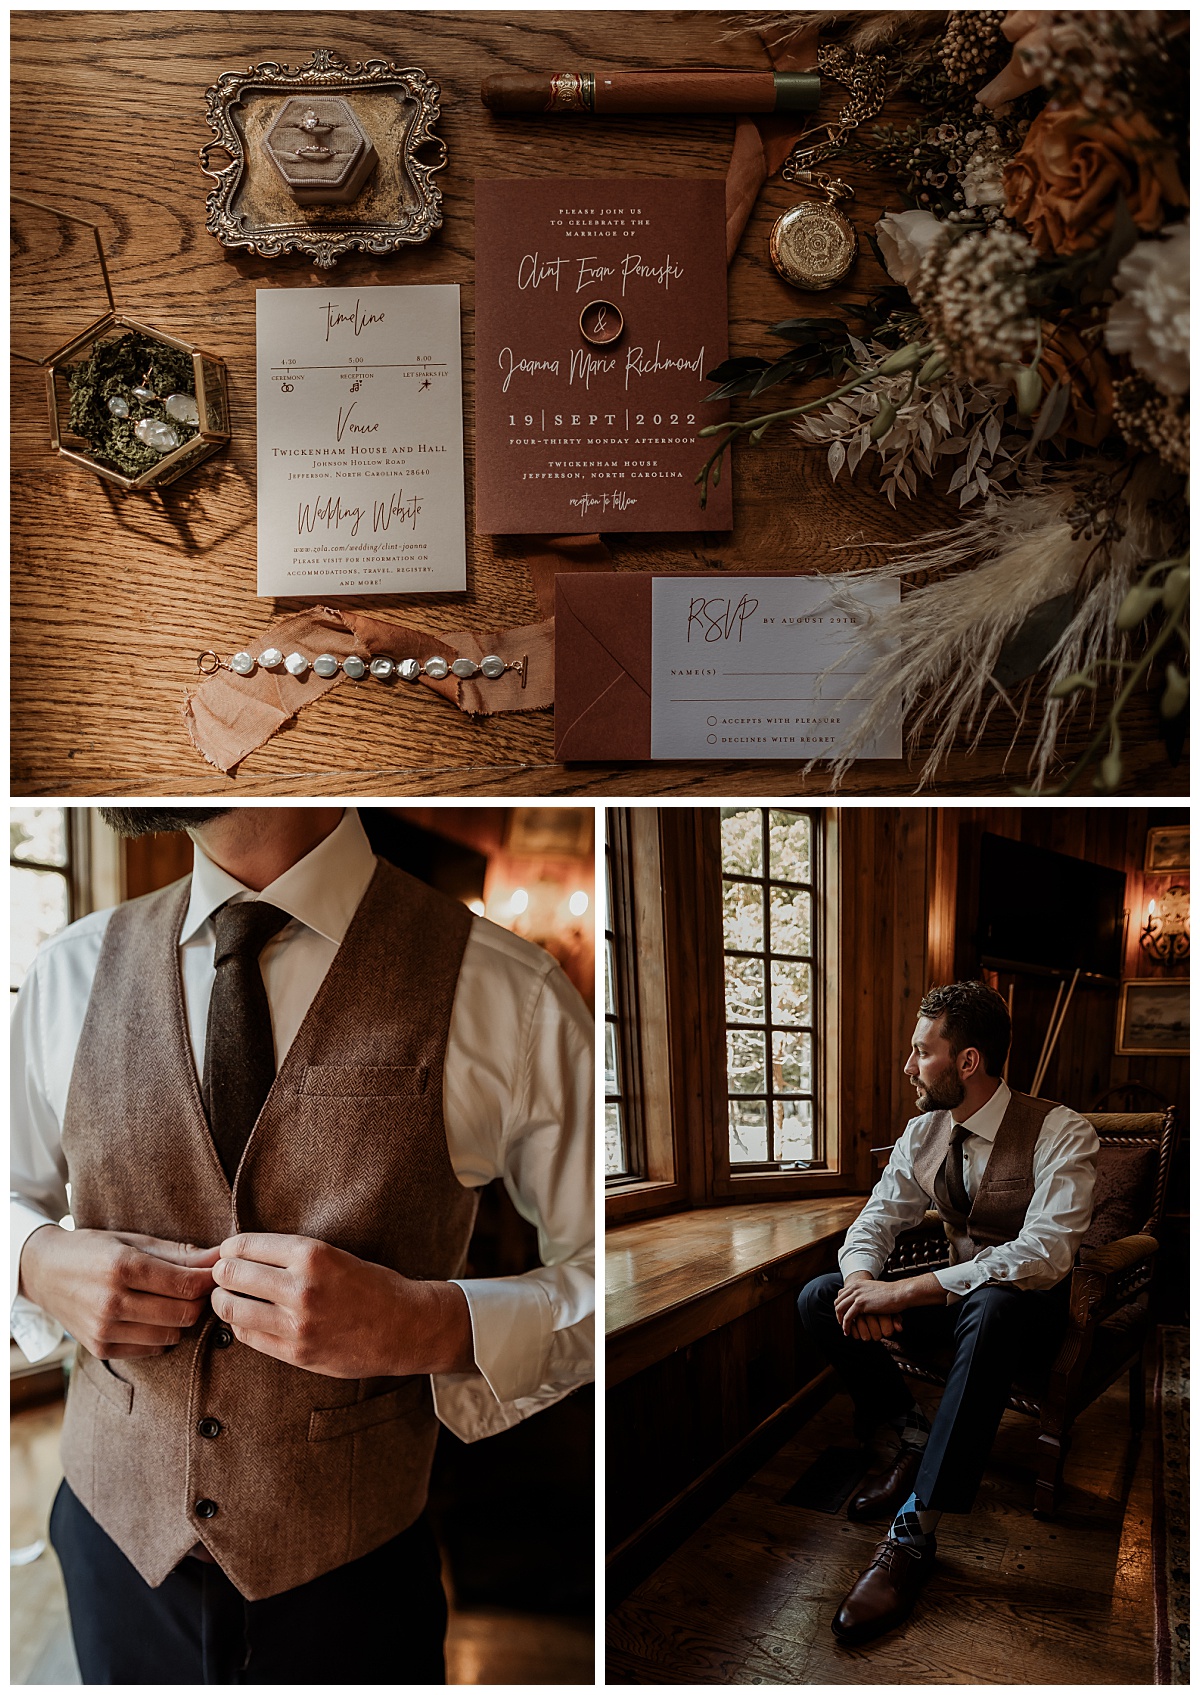 Groom and wedding suite details for a boho elopement at Twickenham House in Jefferson, North Carolina captured by Paisley Sunshine Weddings. 